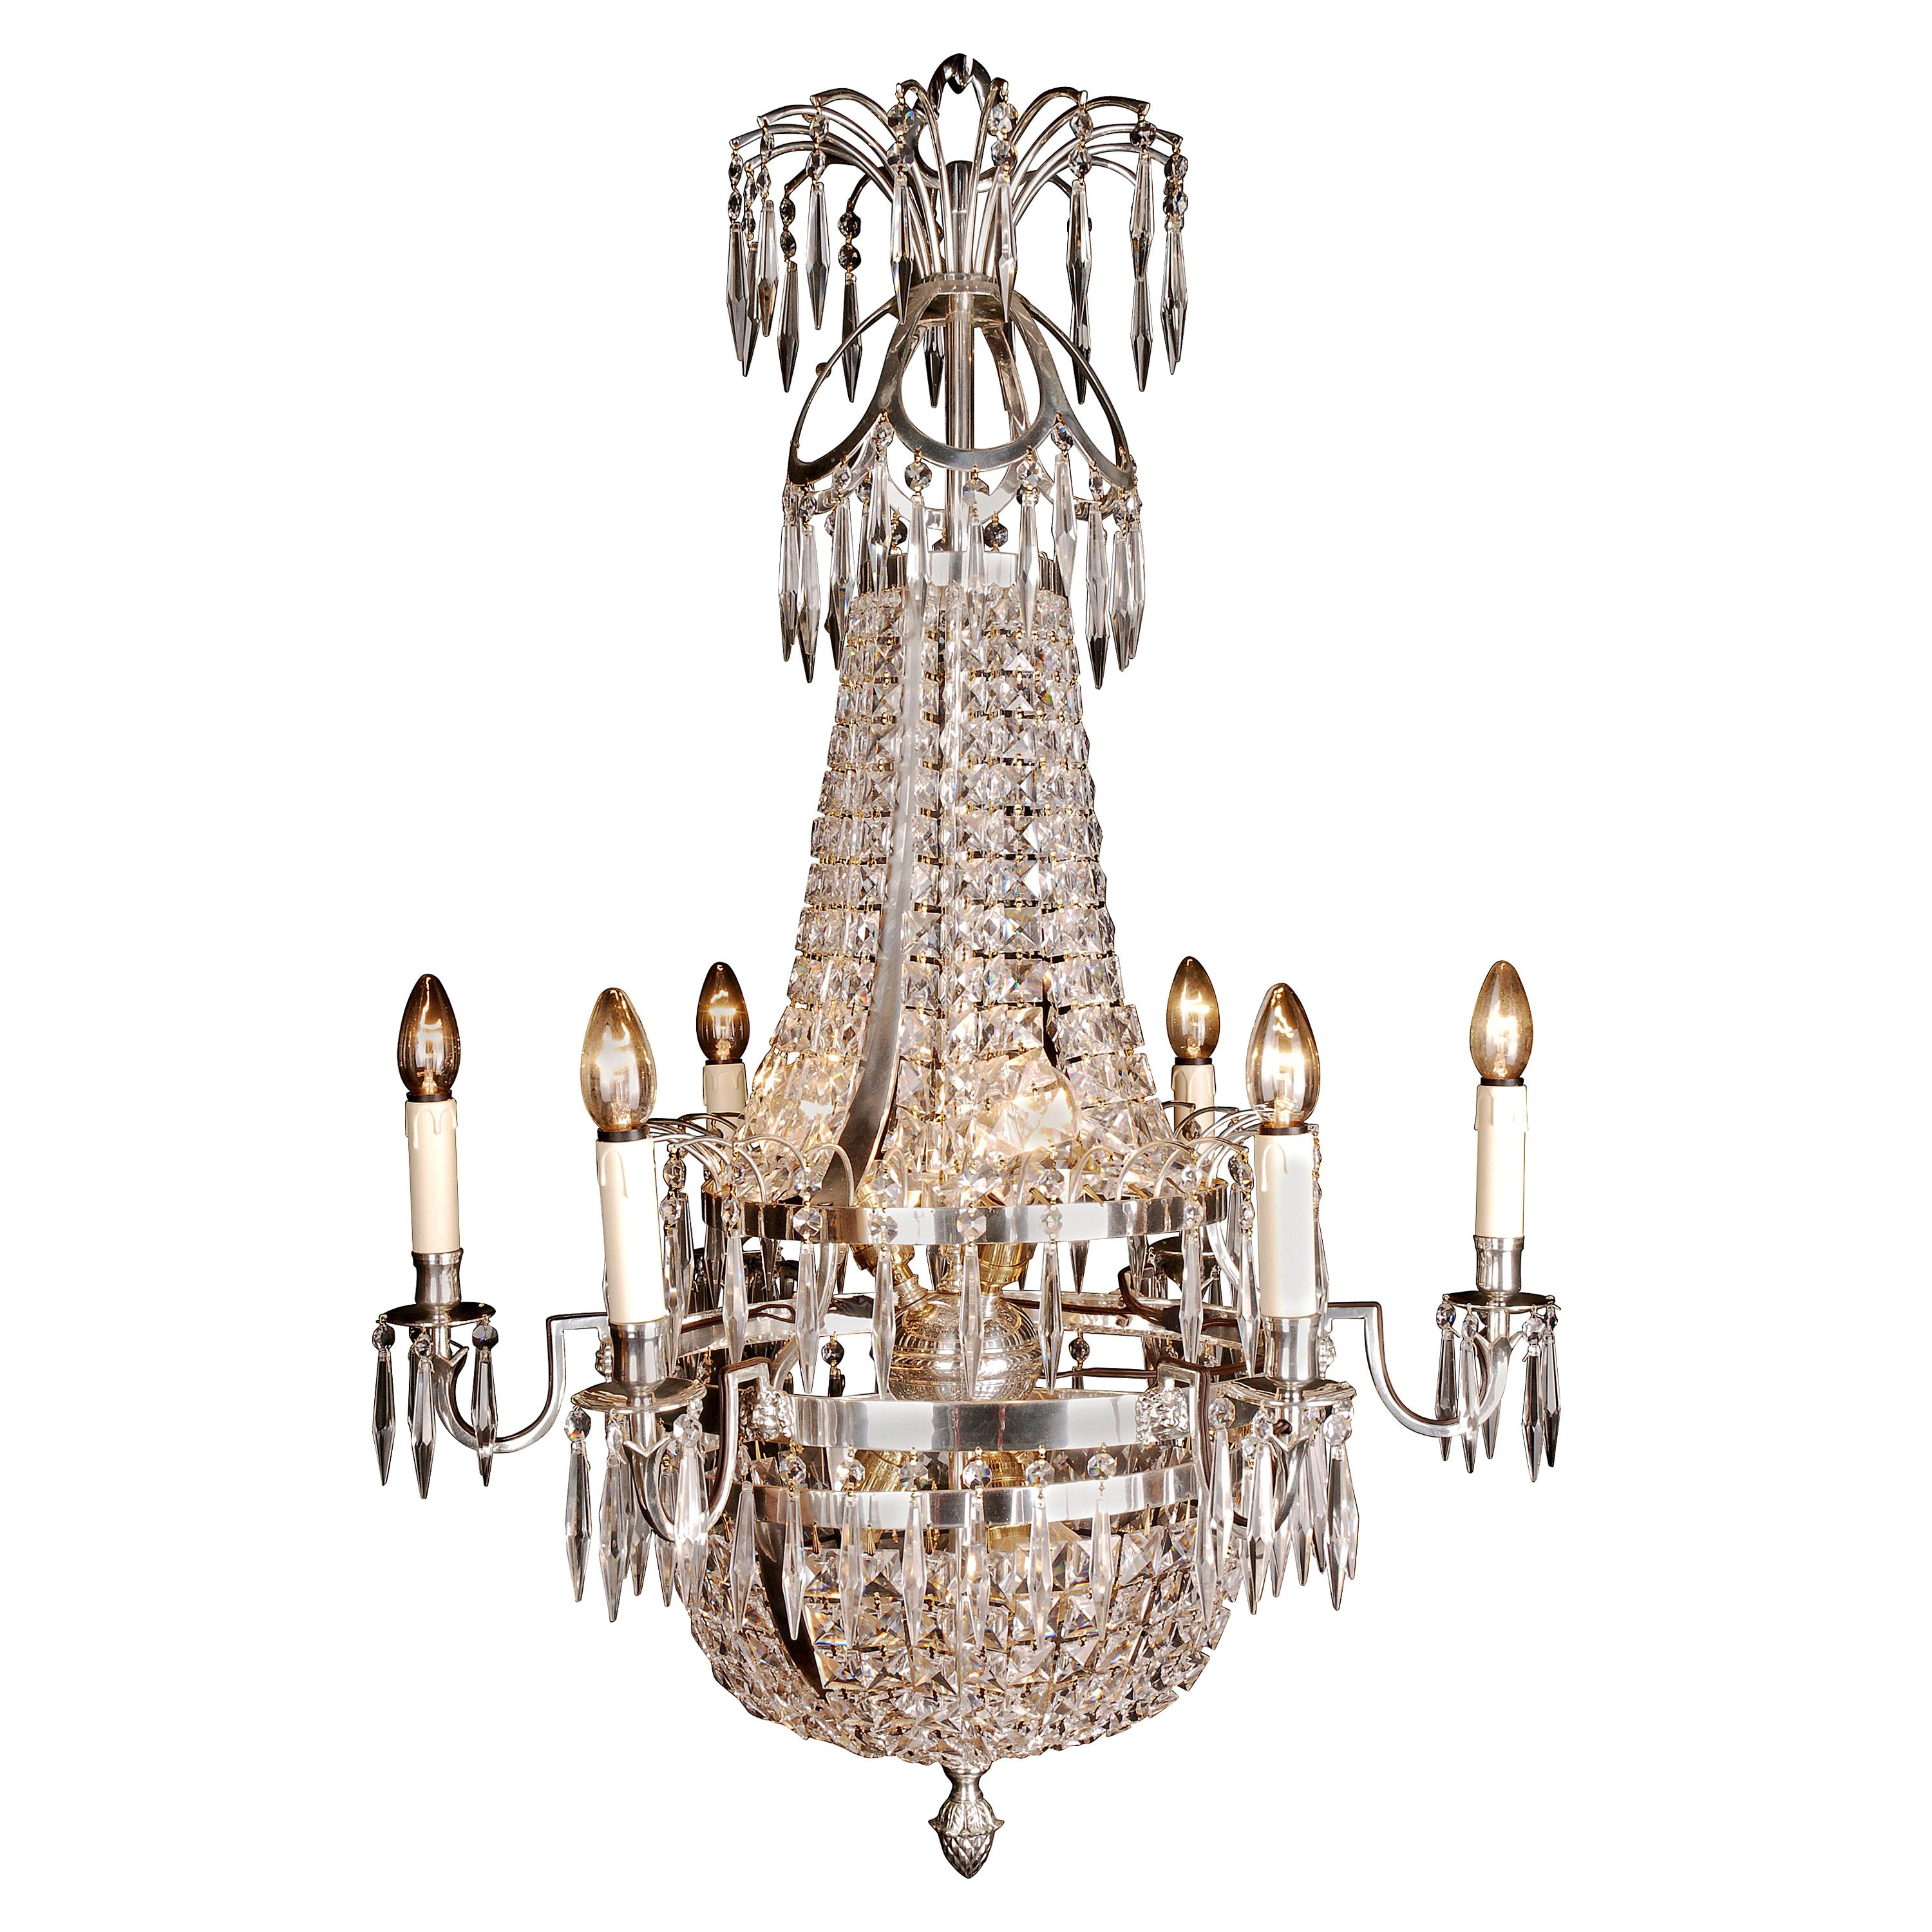 20th Century Classicist Style Swedish Empire Ceiling Candelabra For Sale